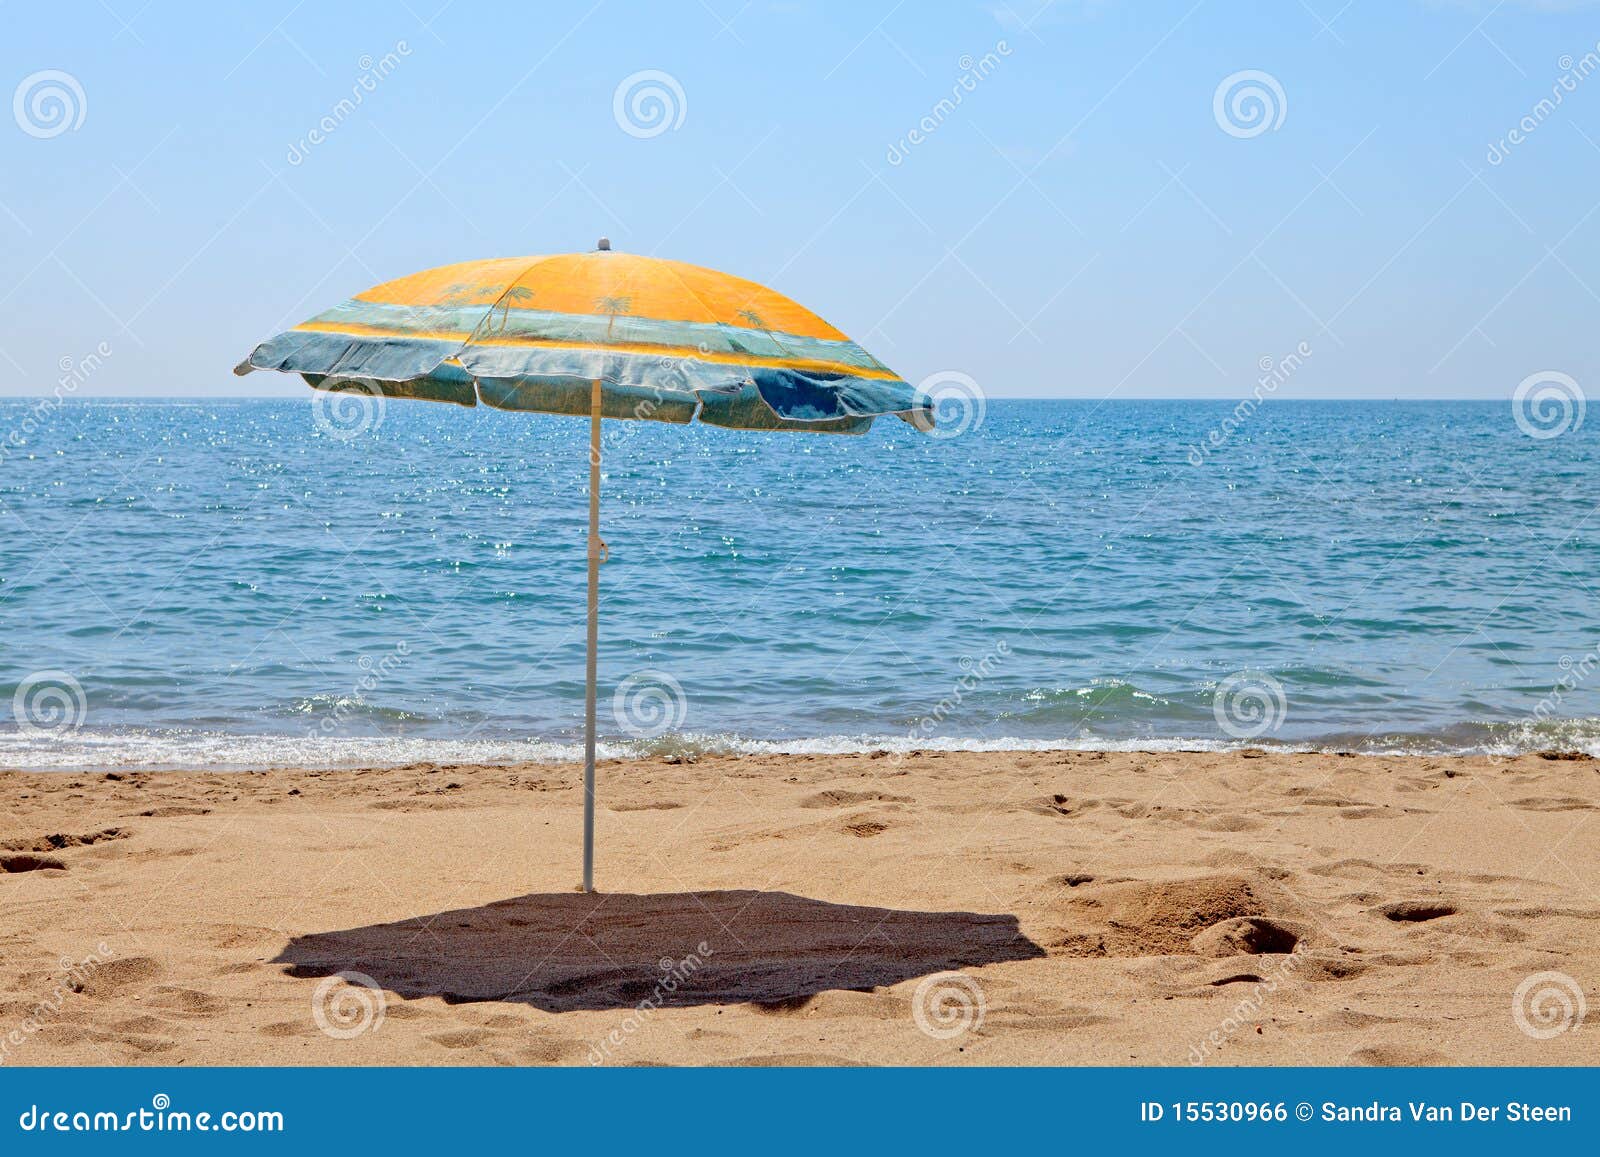 Lonely Umbrella on the Beach Stock Photo - Image of empty, water: 15530966